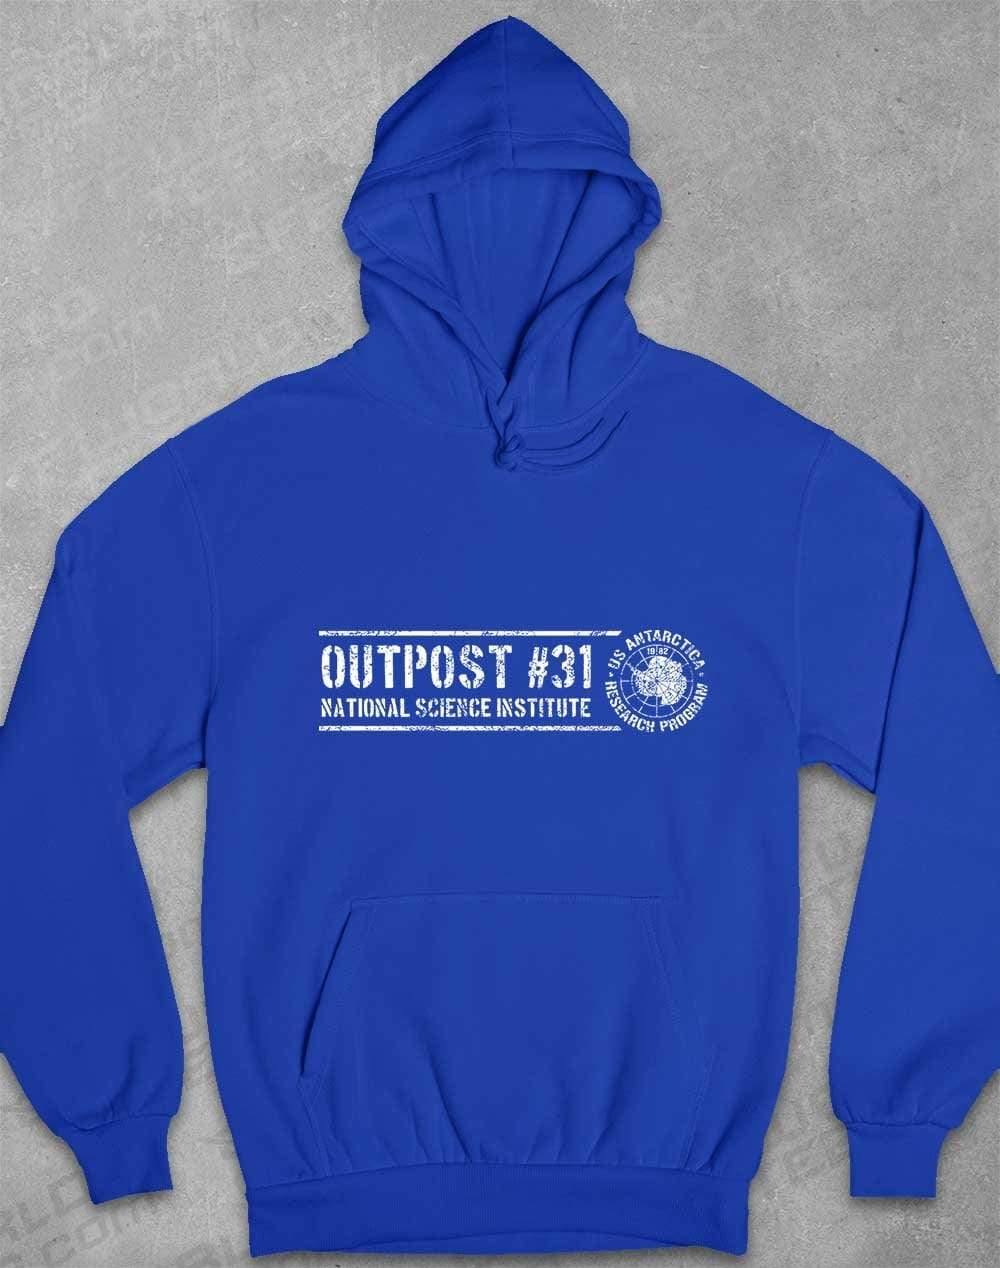 Outpost 31 Antarctica Hoodie XS / Royal Blue  - Off World Tees